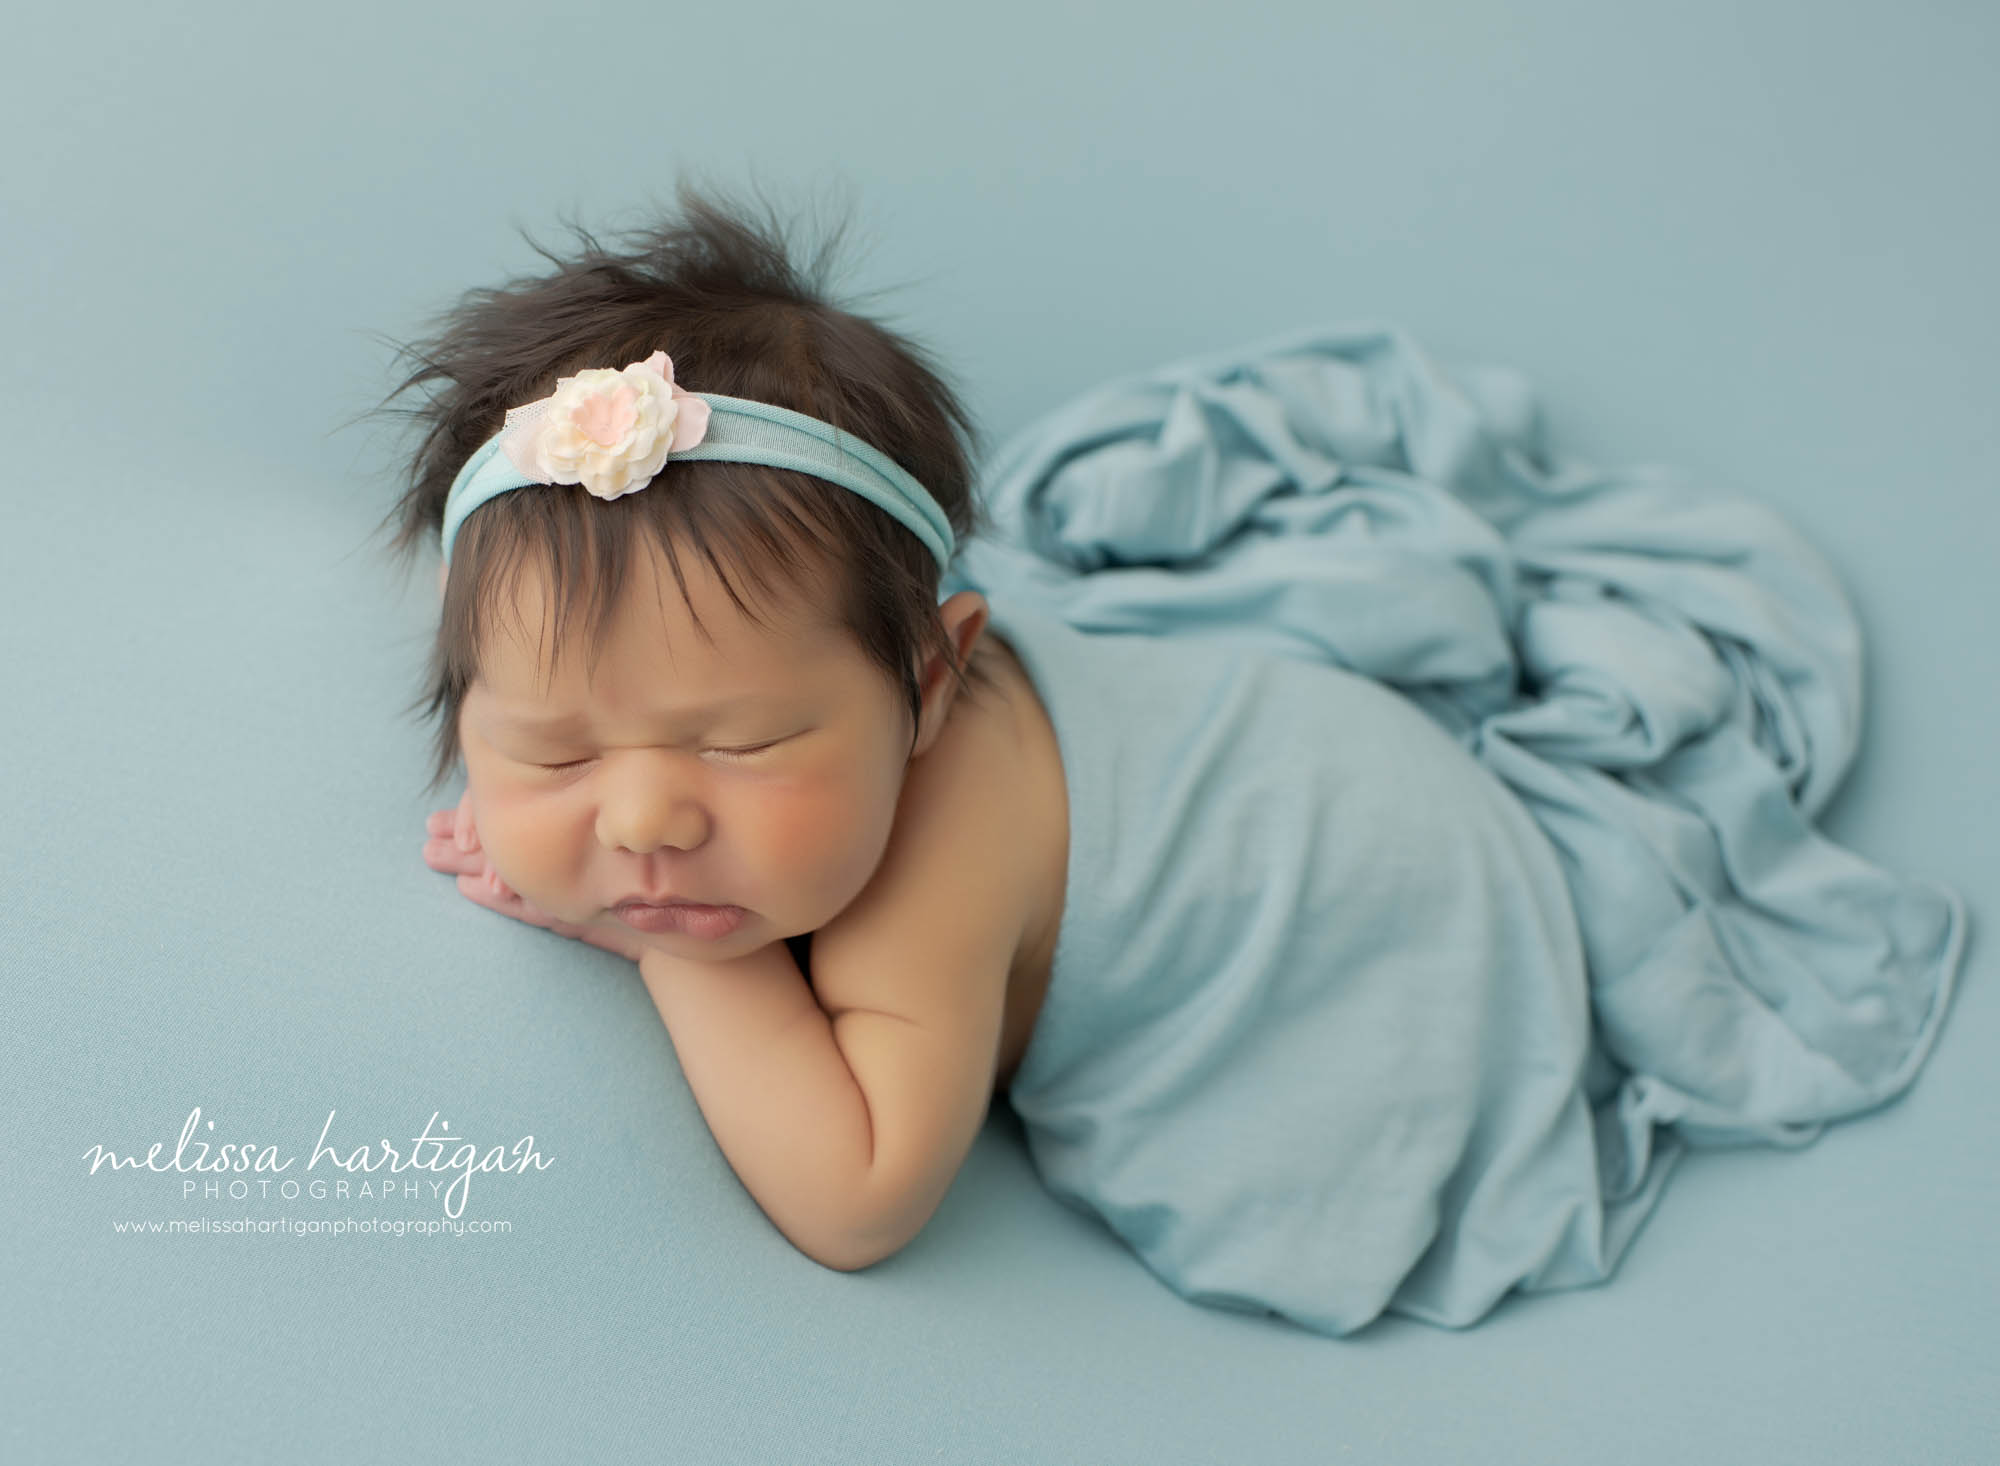 Newborn baby girl posed on side with light blue wrap draped over baby girl meriden newborn photography